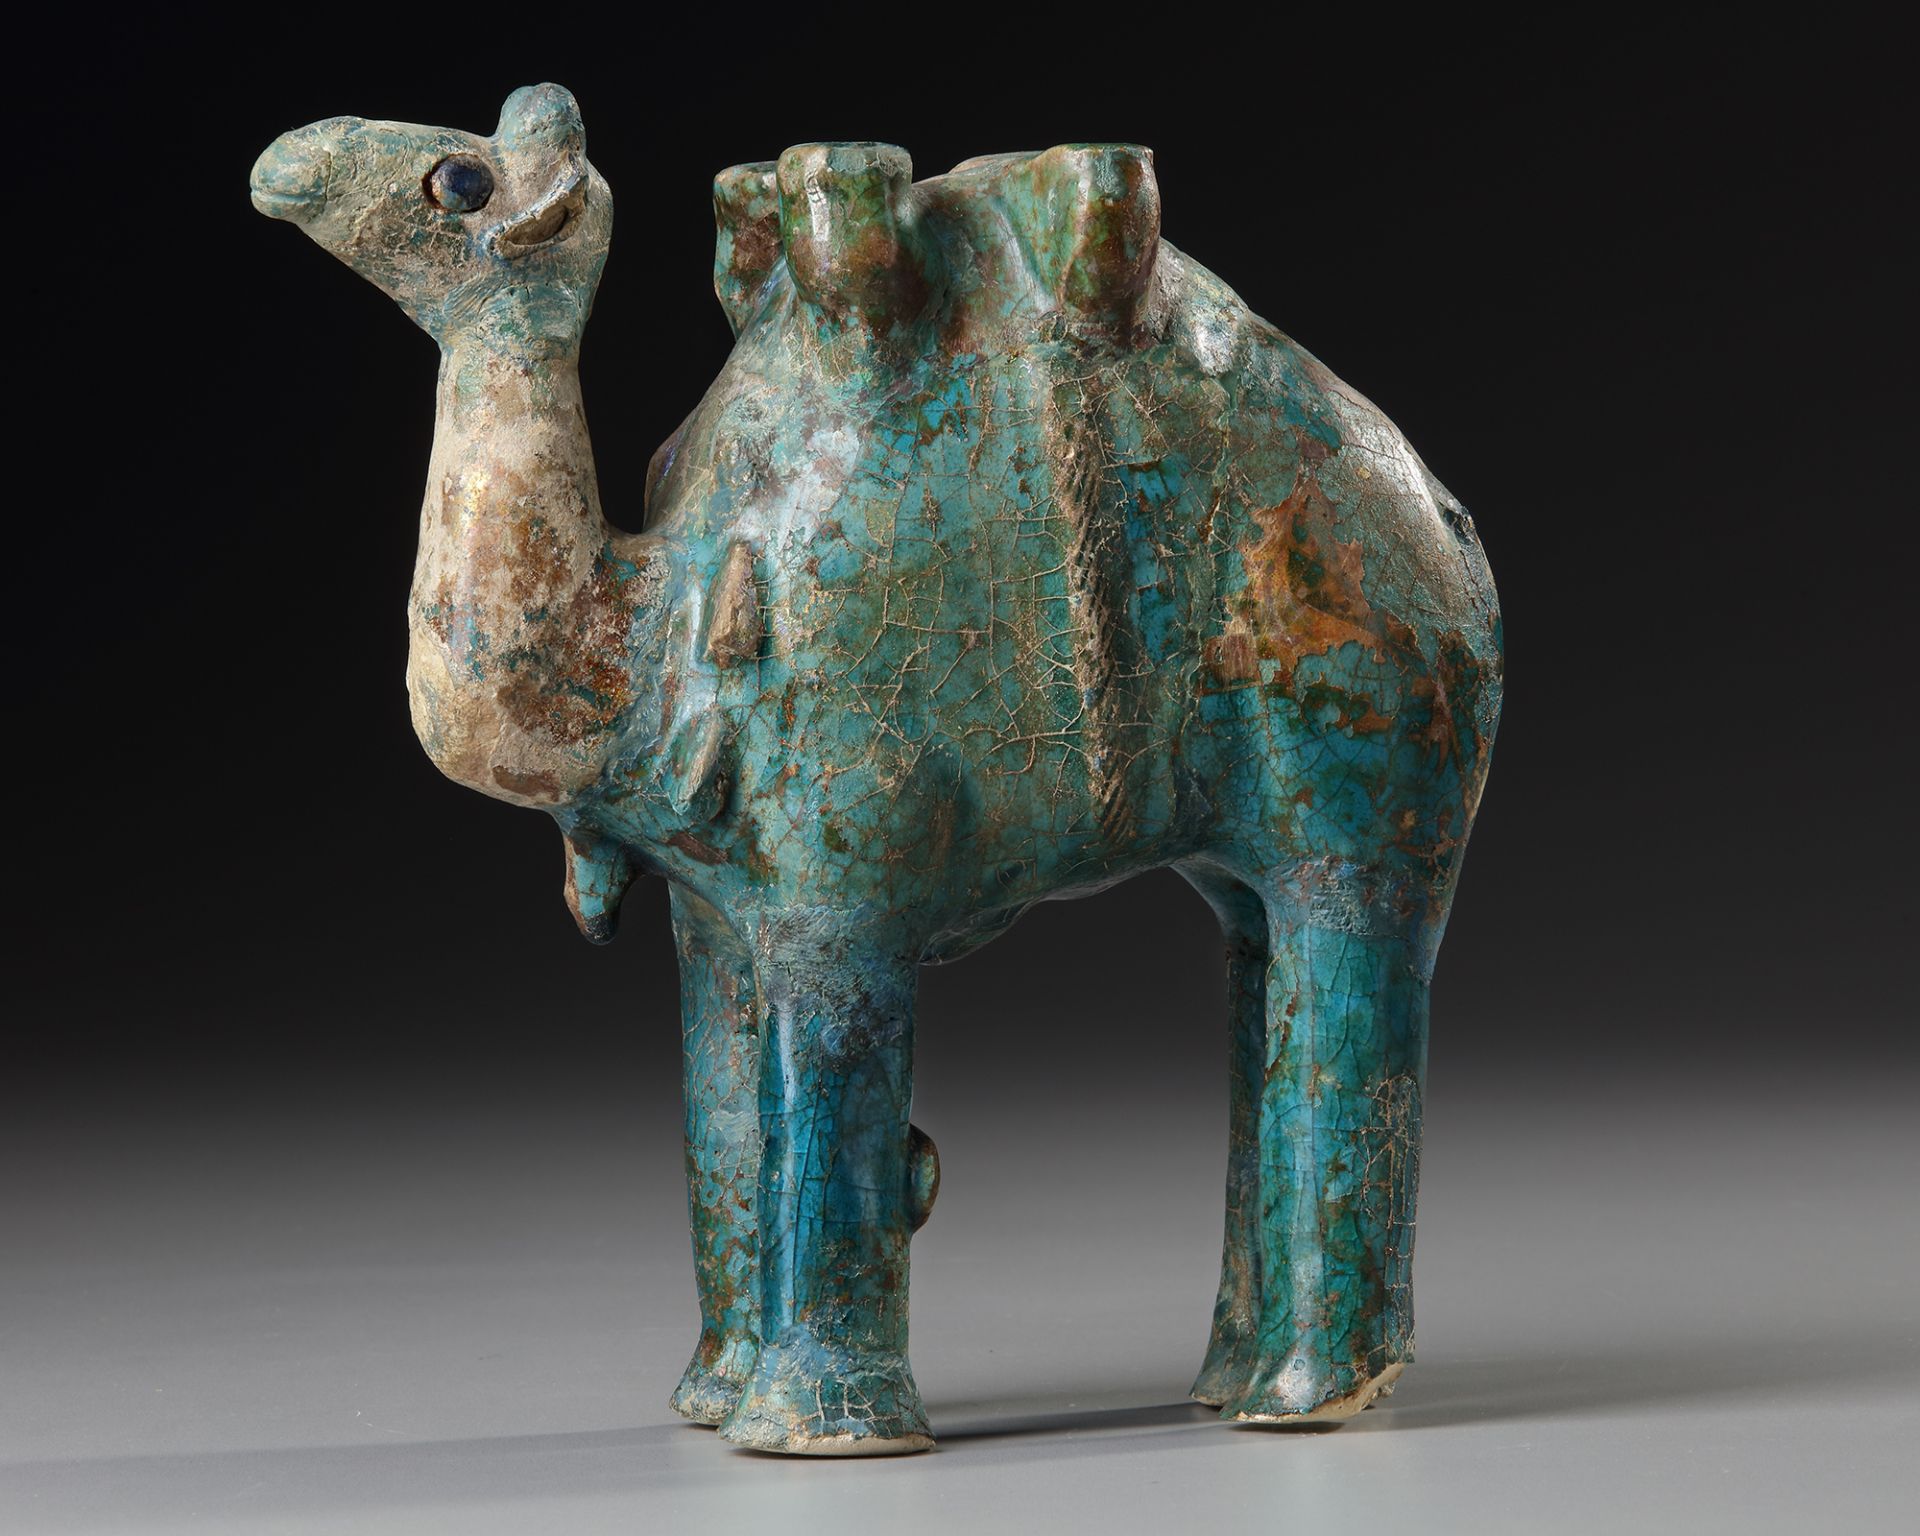 A TURQUOISE GLAZED POTTERY FIGURE OF A CAMEL, KASHAN, PERSIA, 11TH-12TH CENTURY - Image 2 of 8